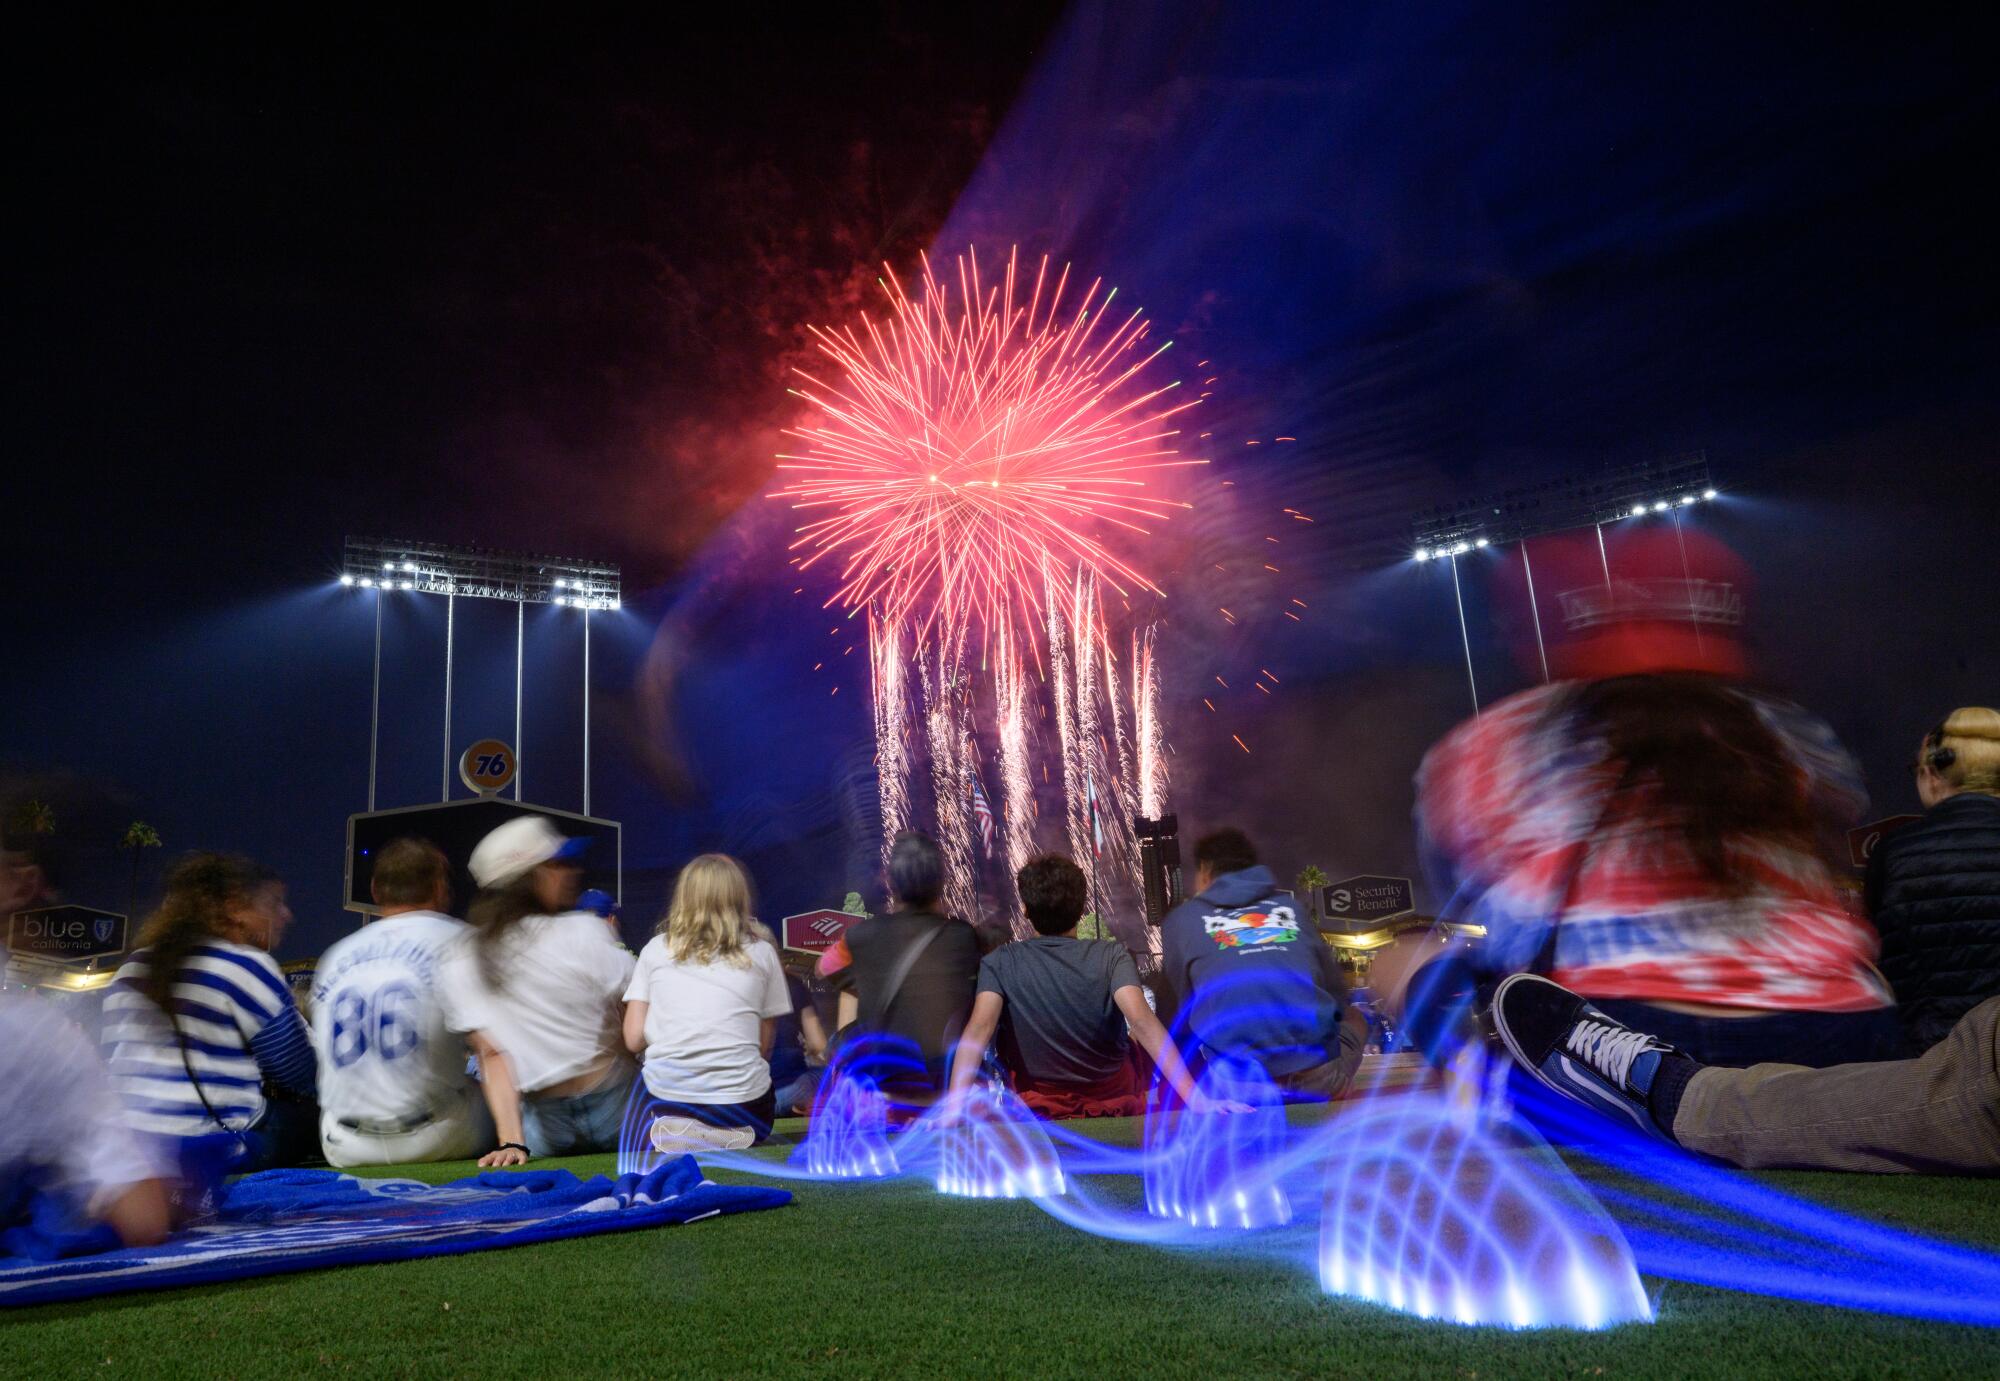 A youngster with blue lights on his sneakers runs through the infield as fireworks are displayed over Dodger Stadium.